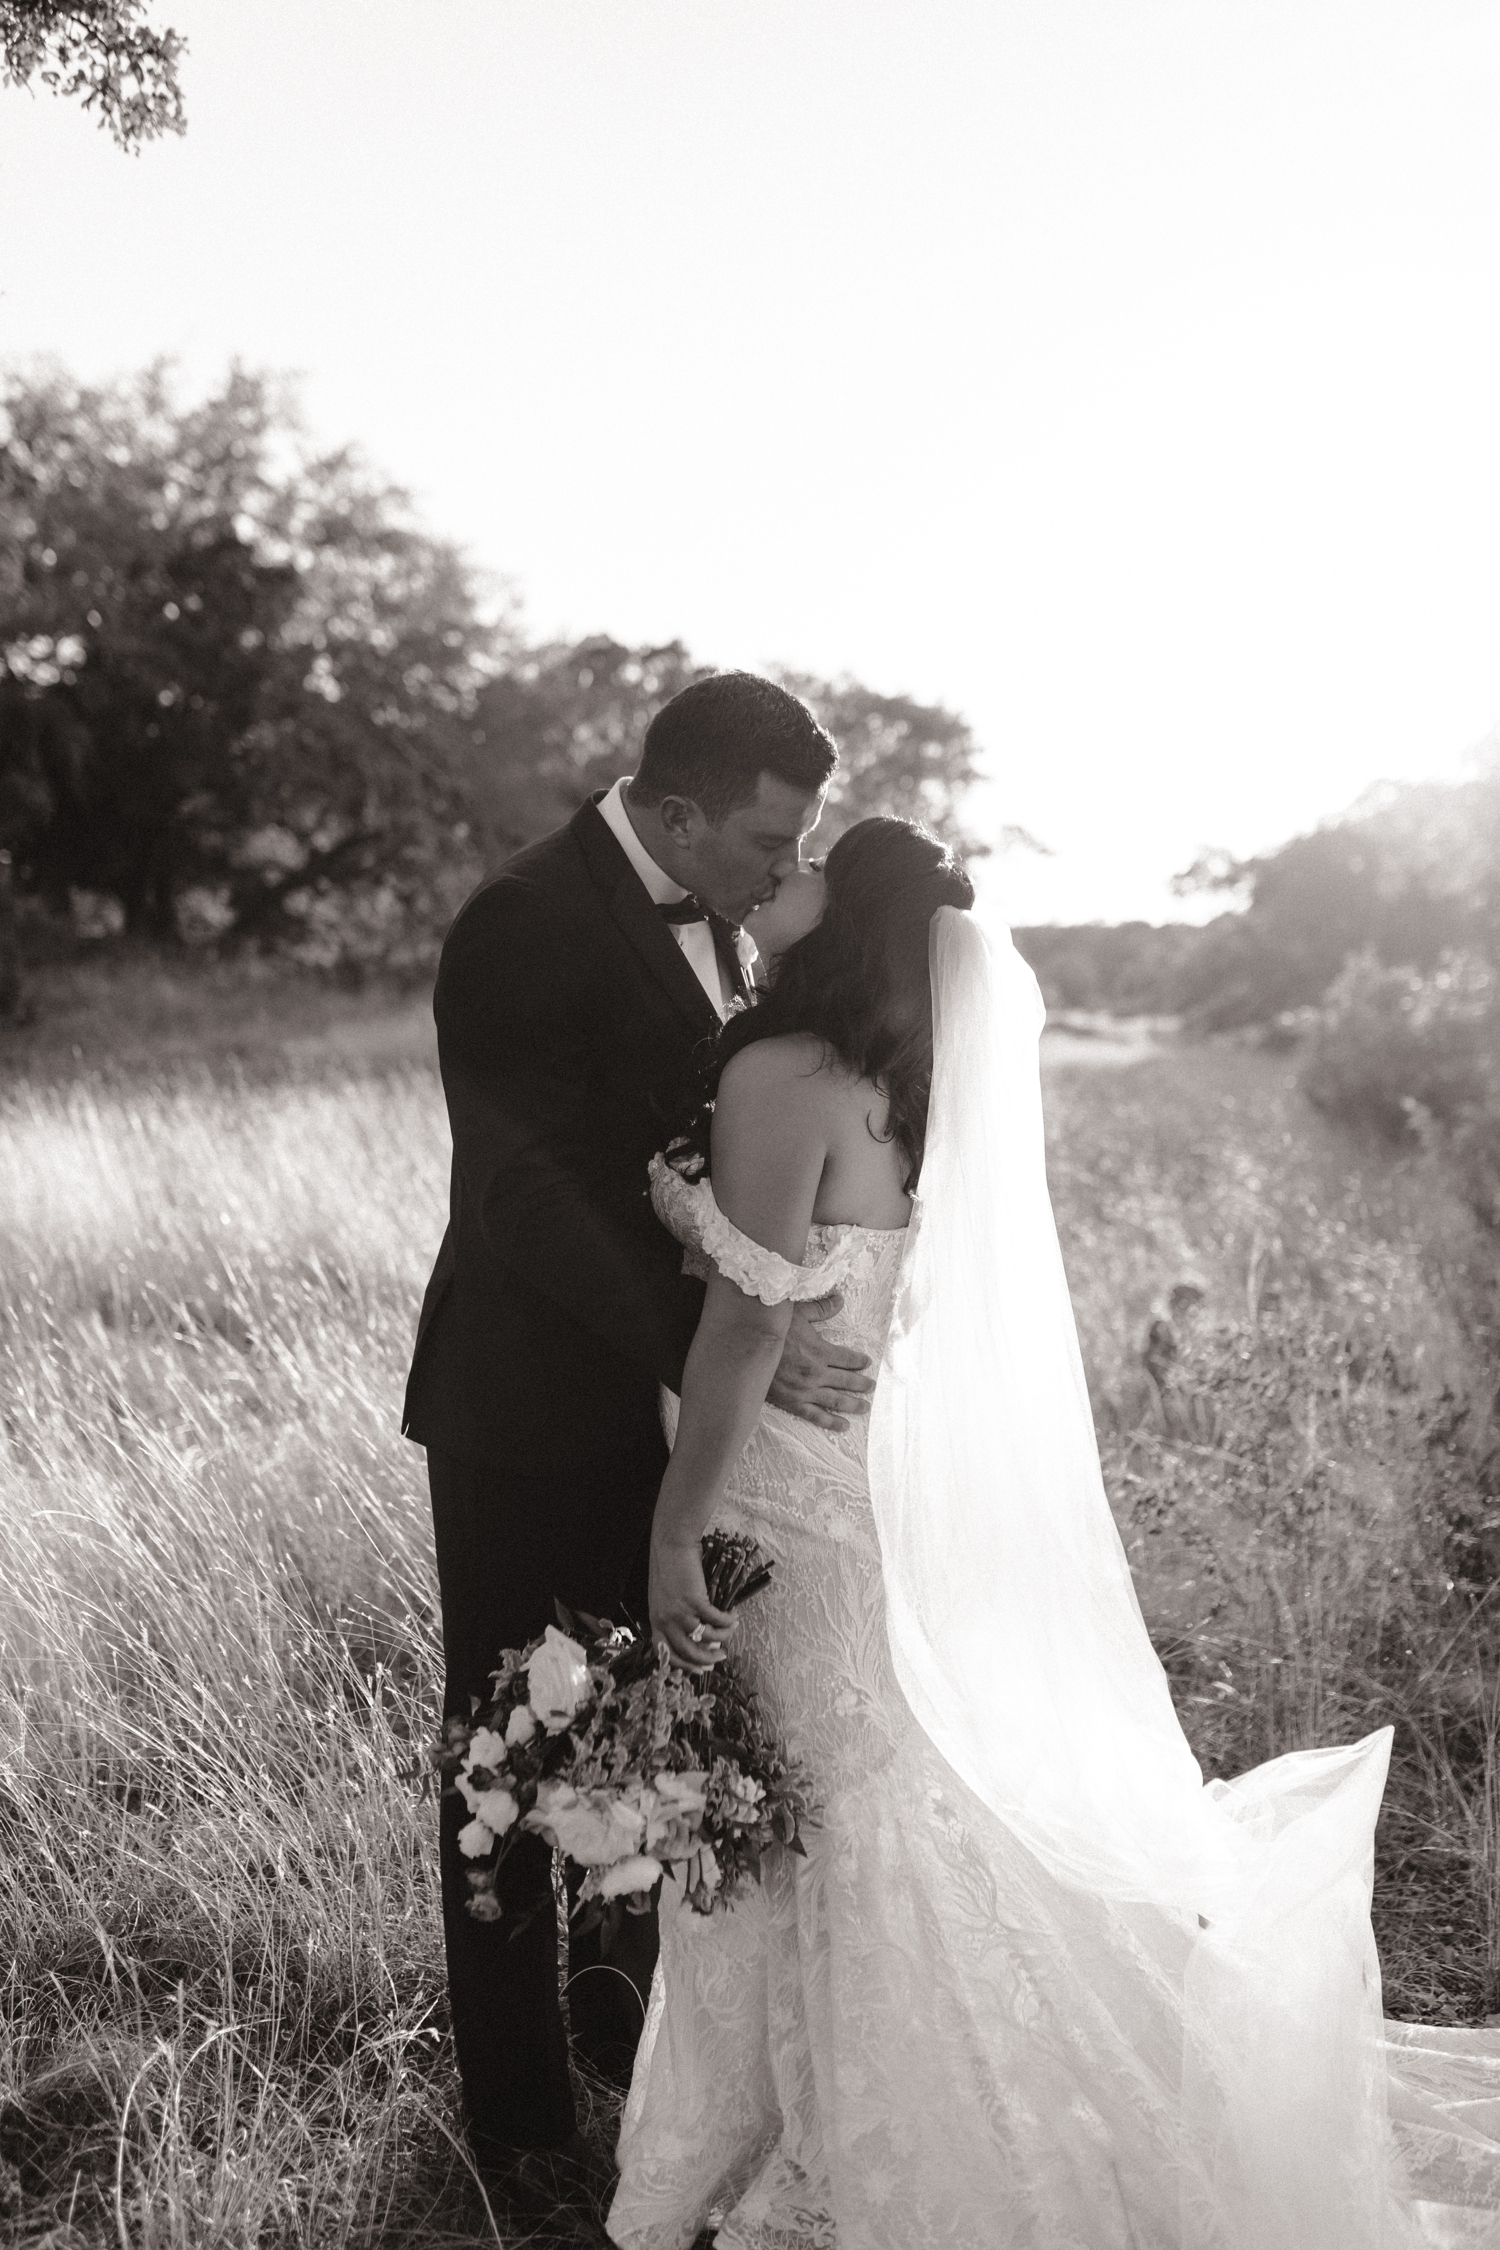 Classic black and white fall wedding day in the Texas Hill Country at Park 31.  | Texas Hill Country Fall Wedding | Central Texas Wedding Floral Designer